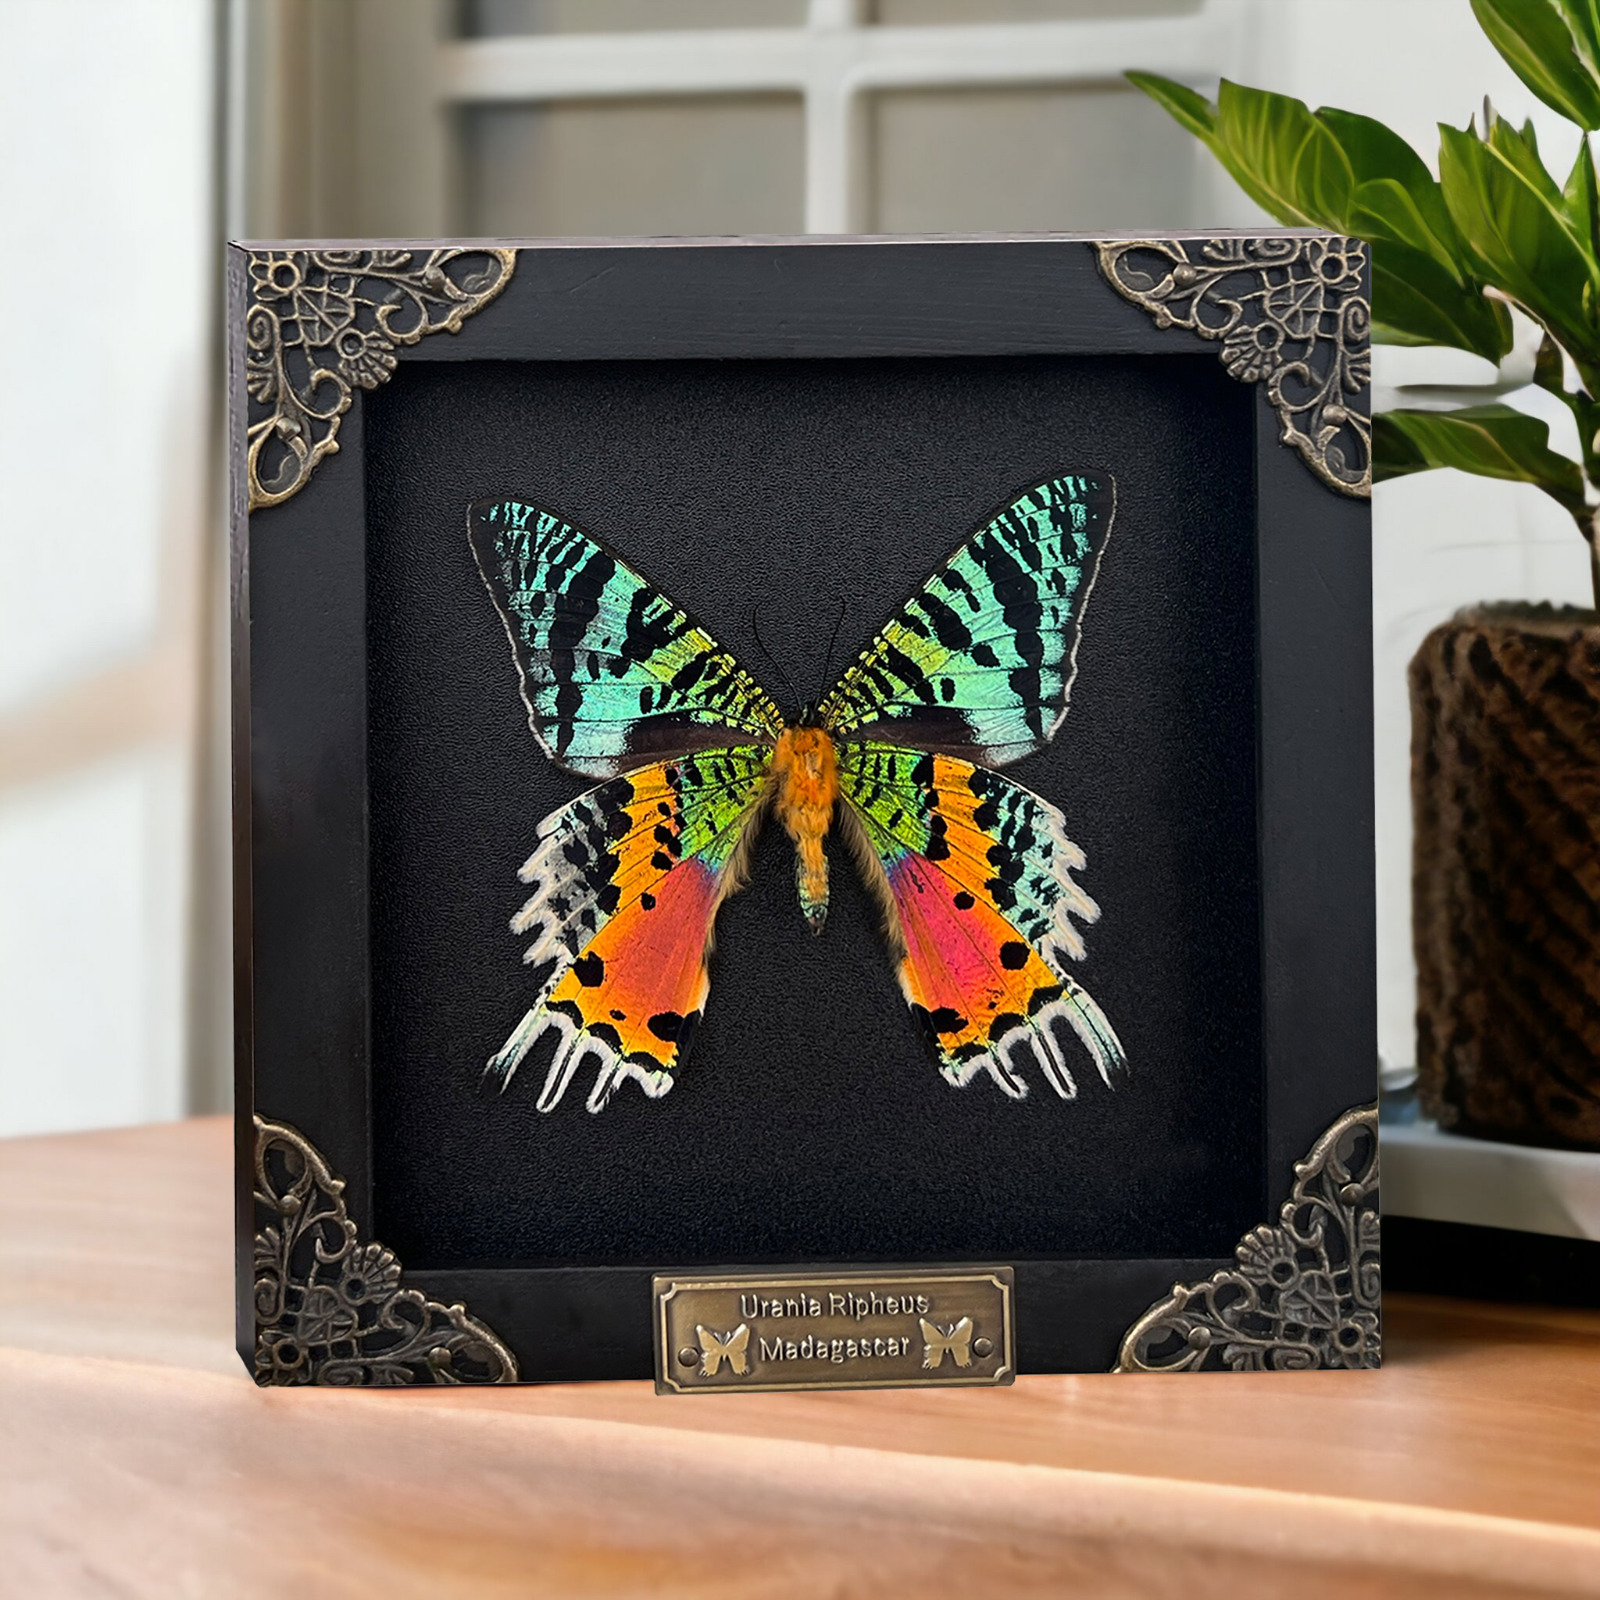 Taxidermy Madagascan Sunset Moth Framed Insect Curiosities And Oddities Decor